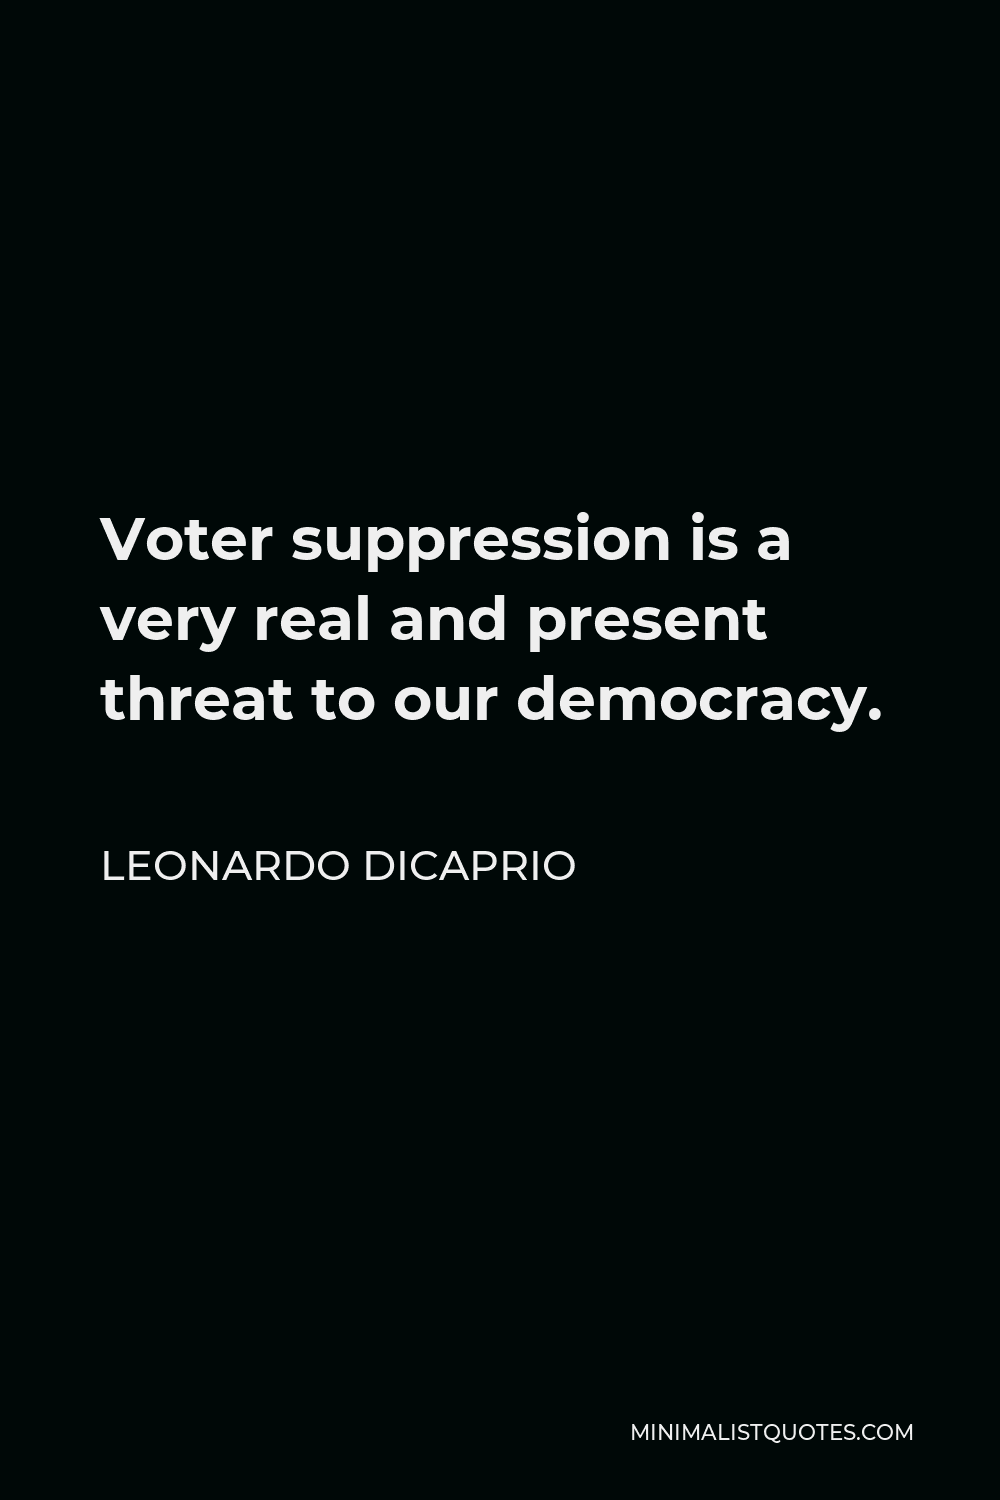 Leonardo DiCaprio Quote - Voter suppression is a very real and present threat to our democracy.